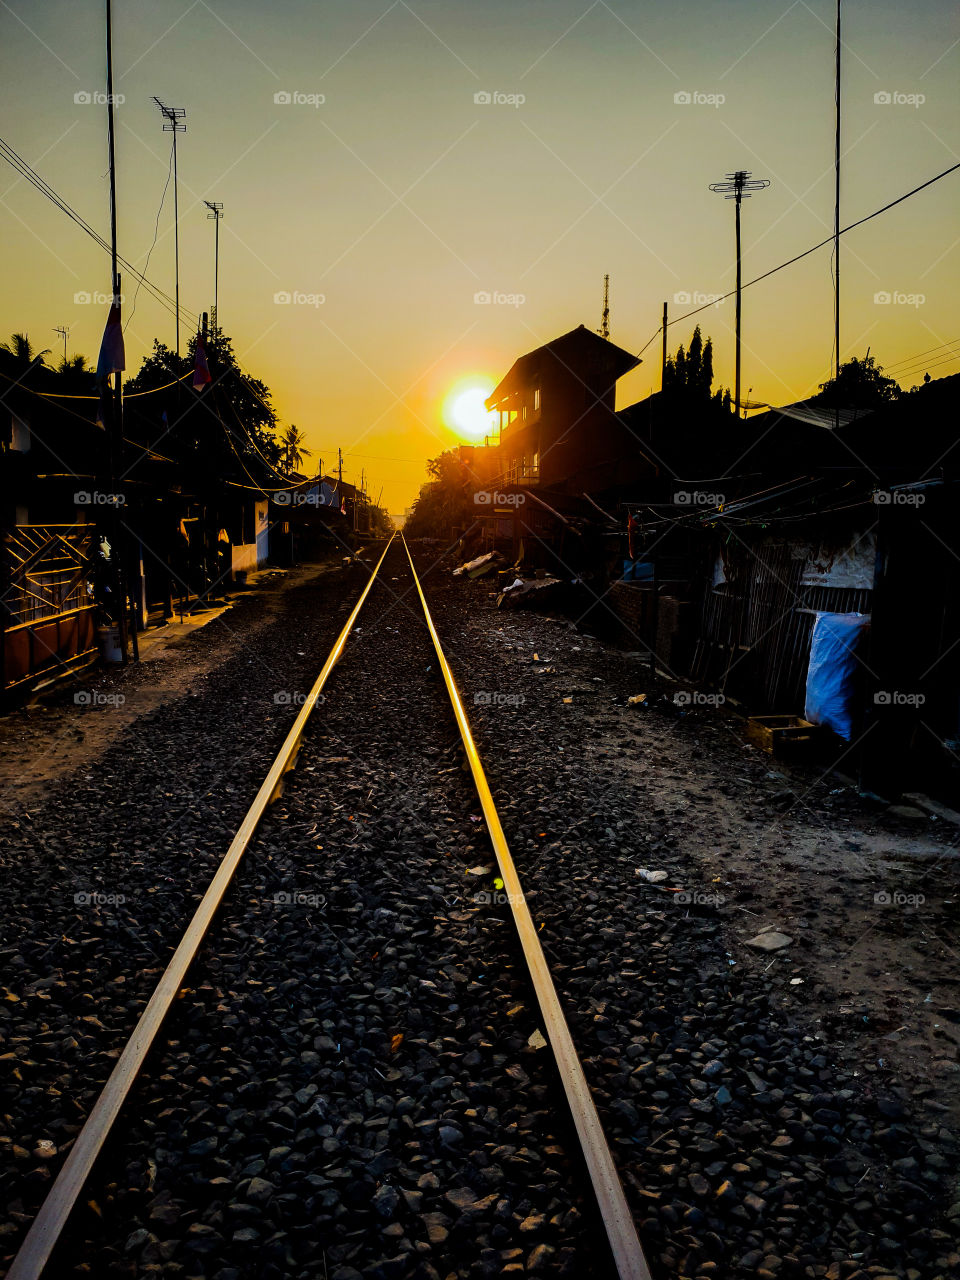 The train line goes to the sun